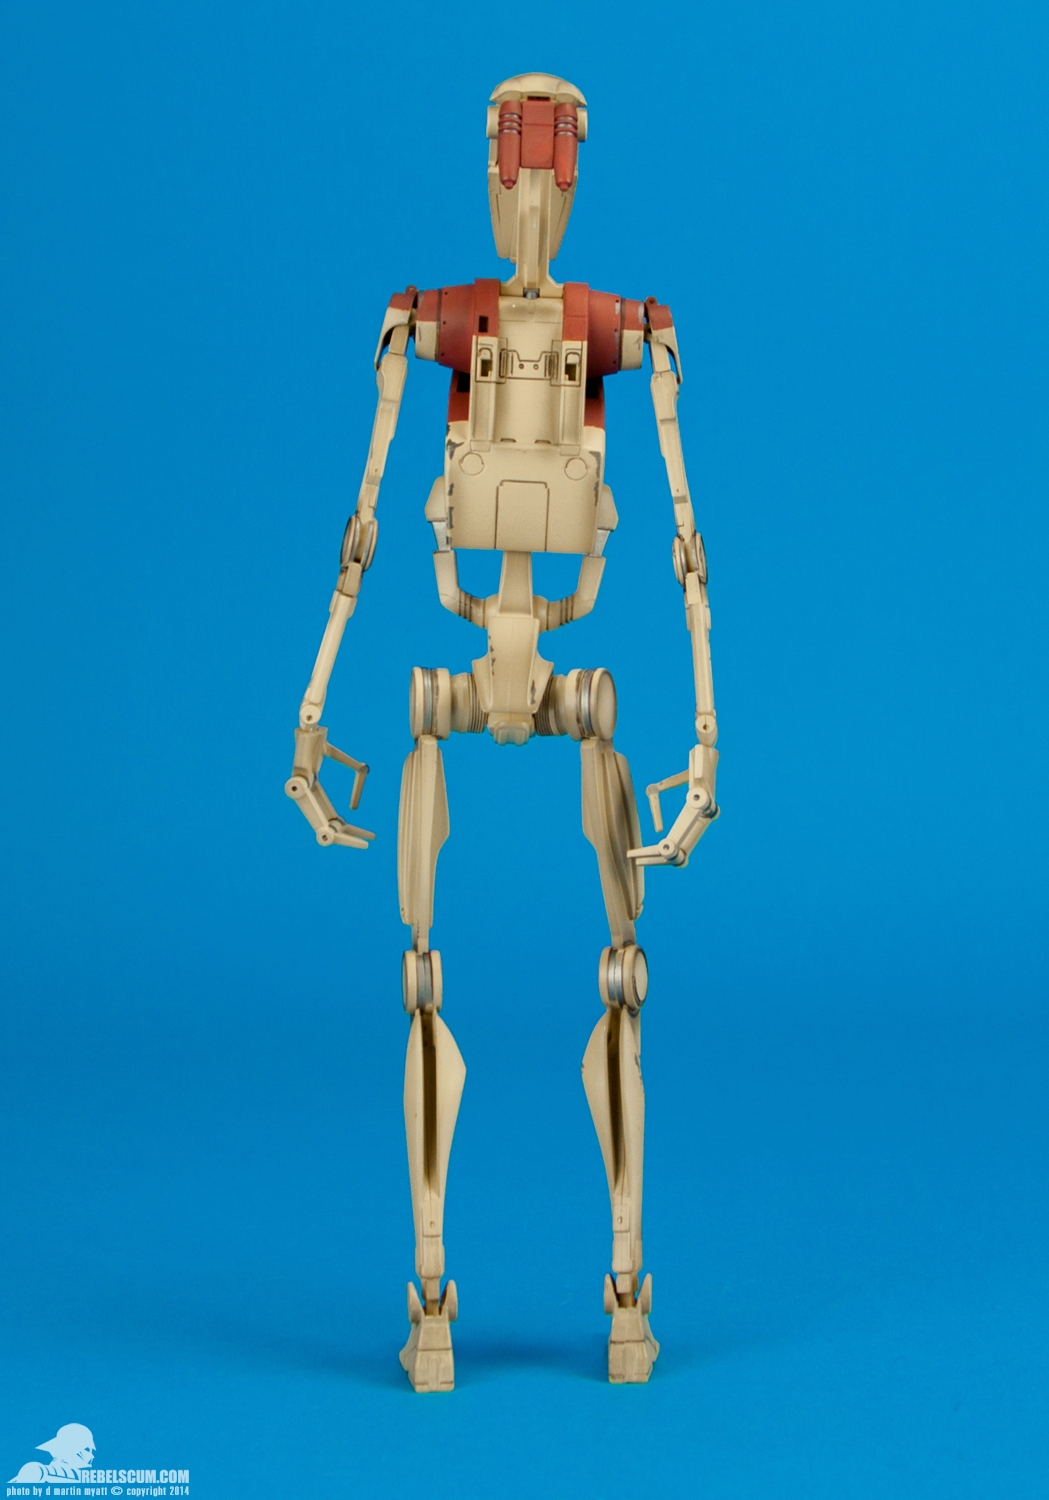 Security-Droids-Sixth-Scale-Sideshow-Collectibles-004.jpg